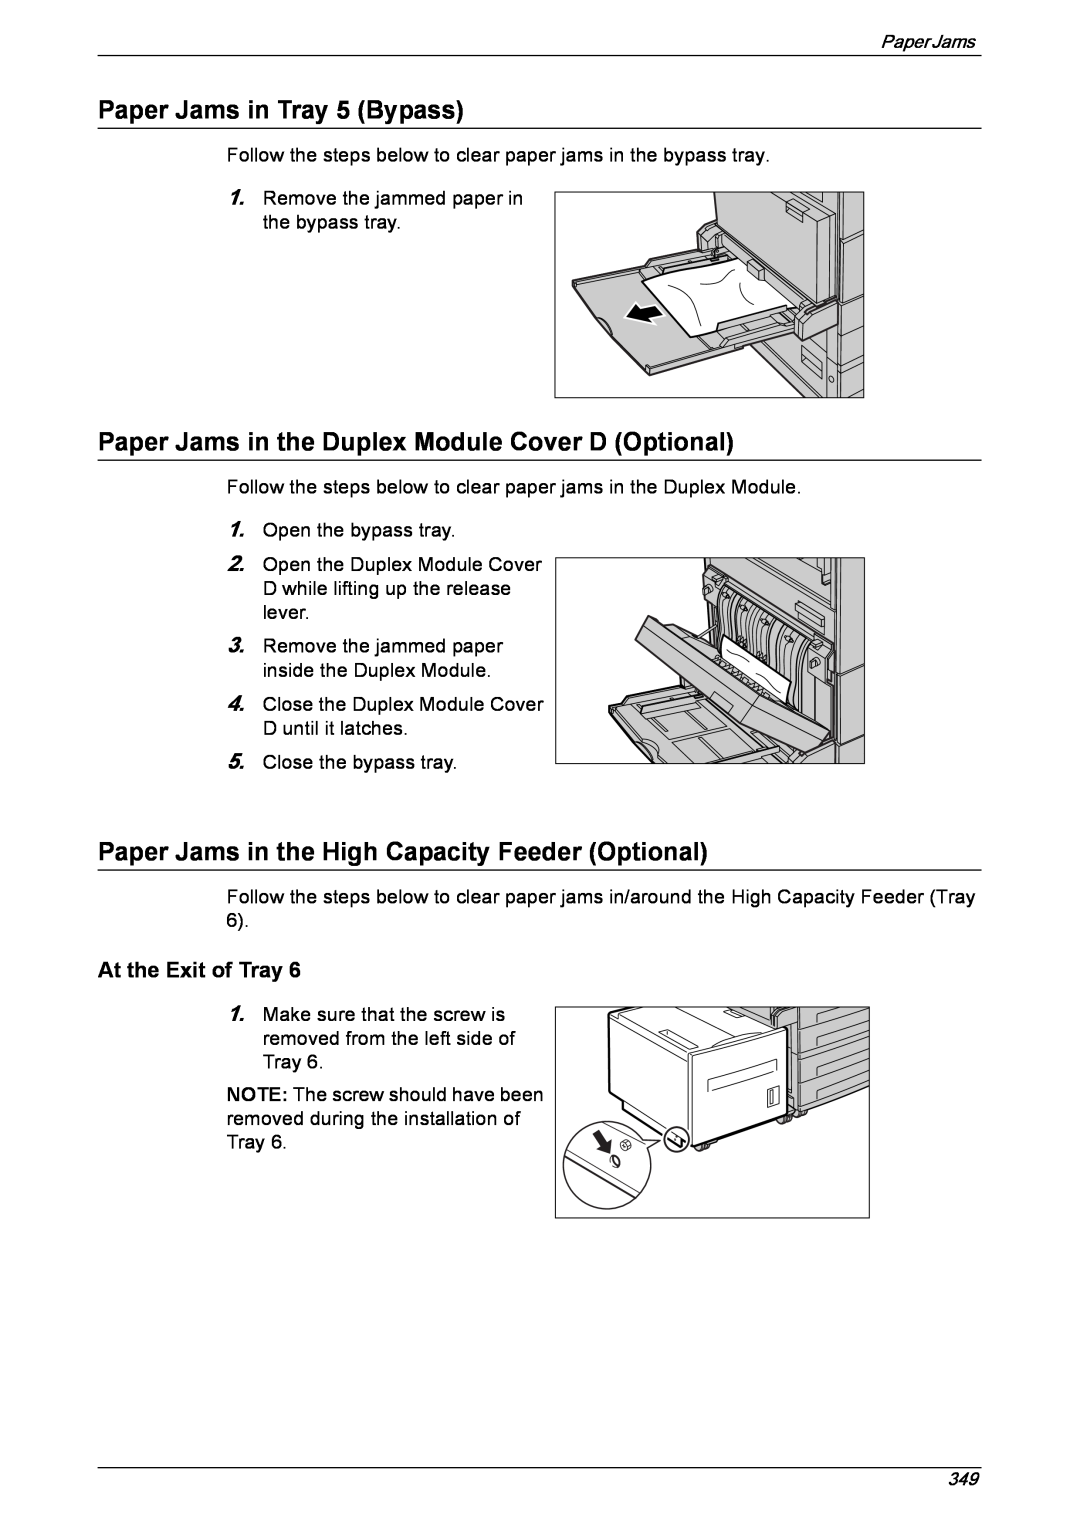 Xerox 5222 manual Paper Jams in Tray 5 Bypass, Paper Jams in the Duplex Module Cover D Optional, At the Exit of Tray 